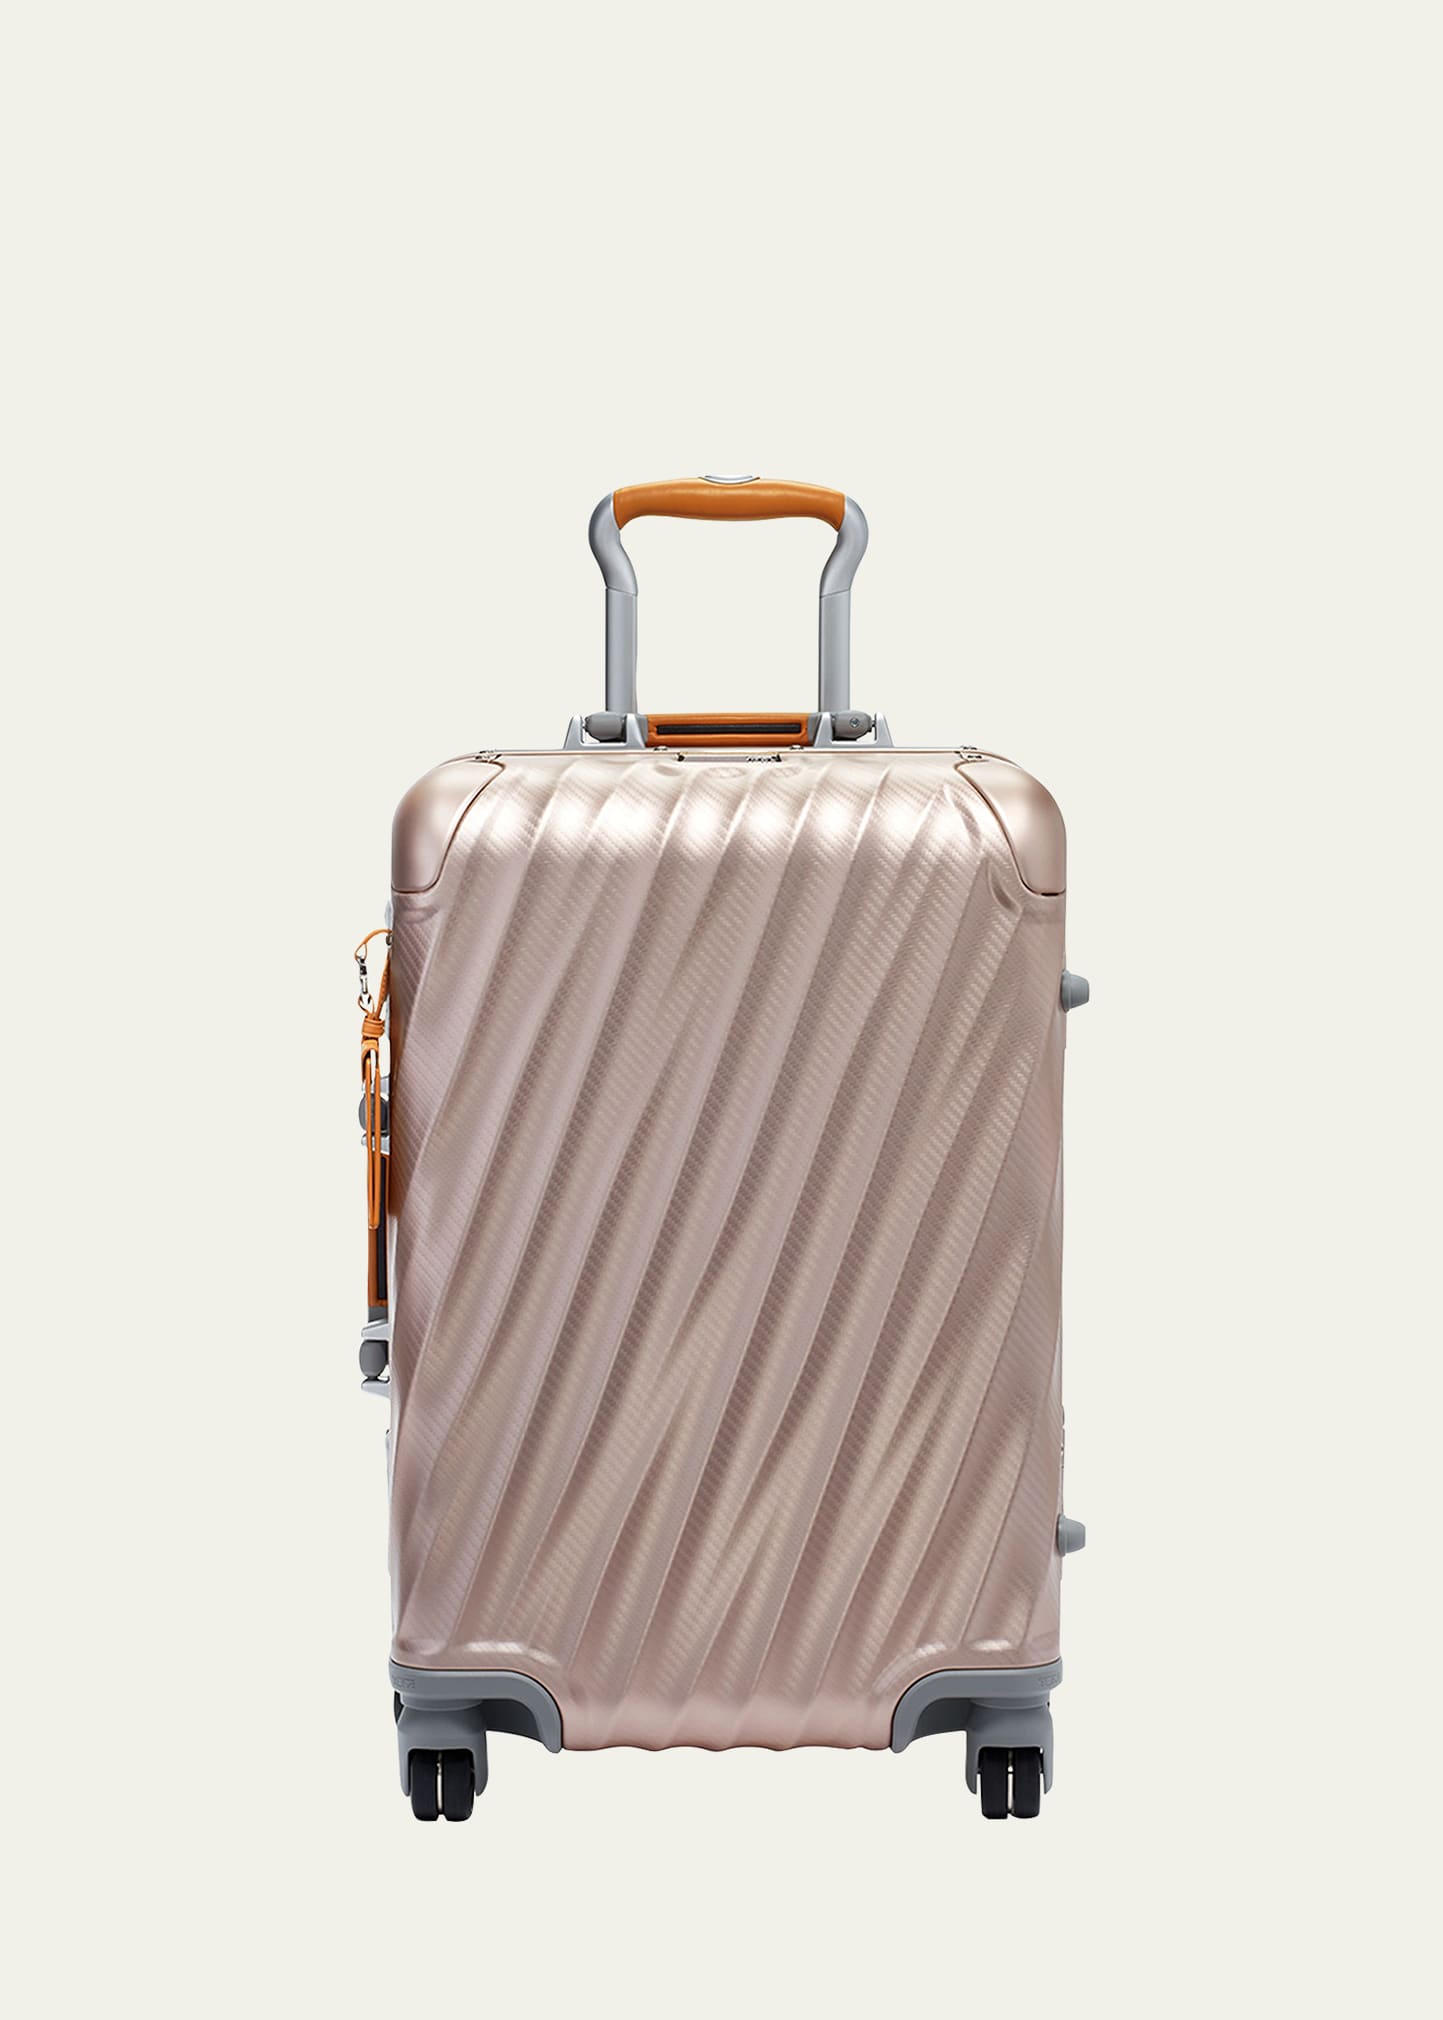 International Carry-On Spinner Luggage